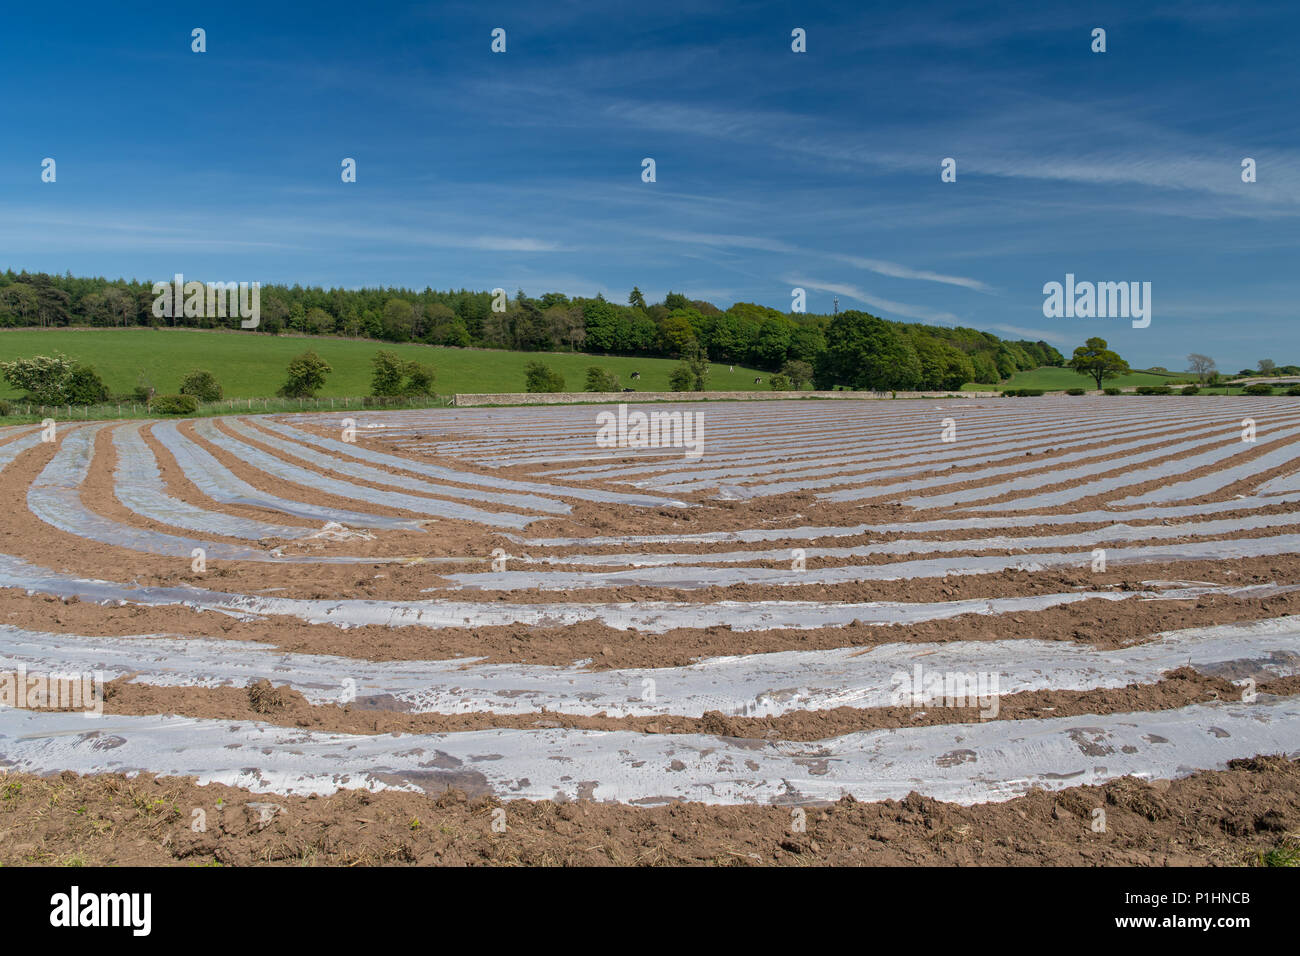 Newly planted field of Maize under bio-degradeable plastic sheeting to help aid early ggrowth. Cumbria, UK. Stock Photo